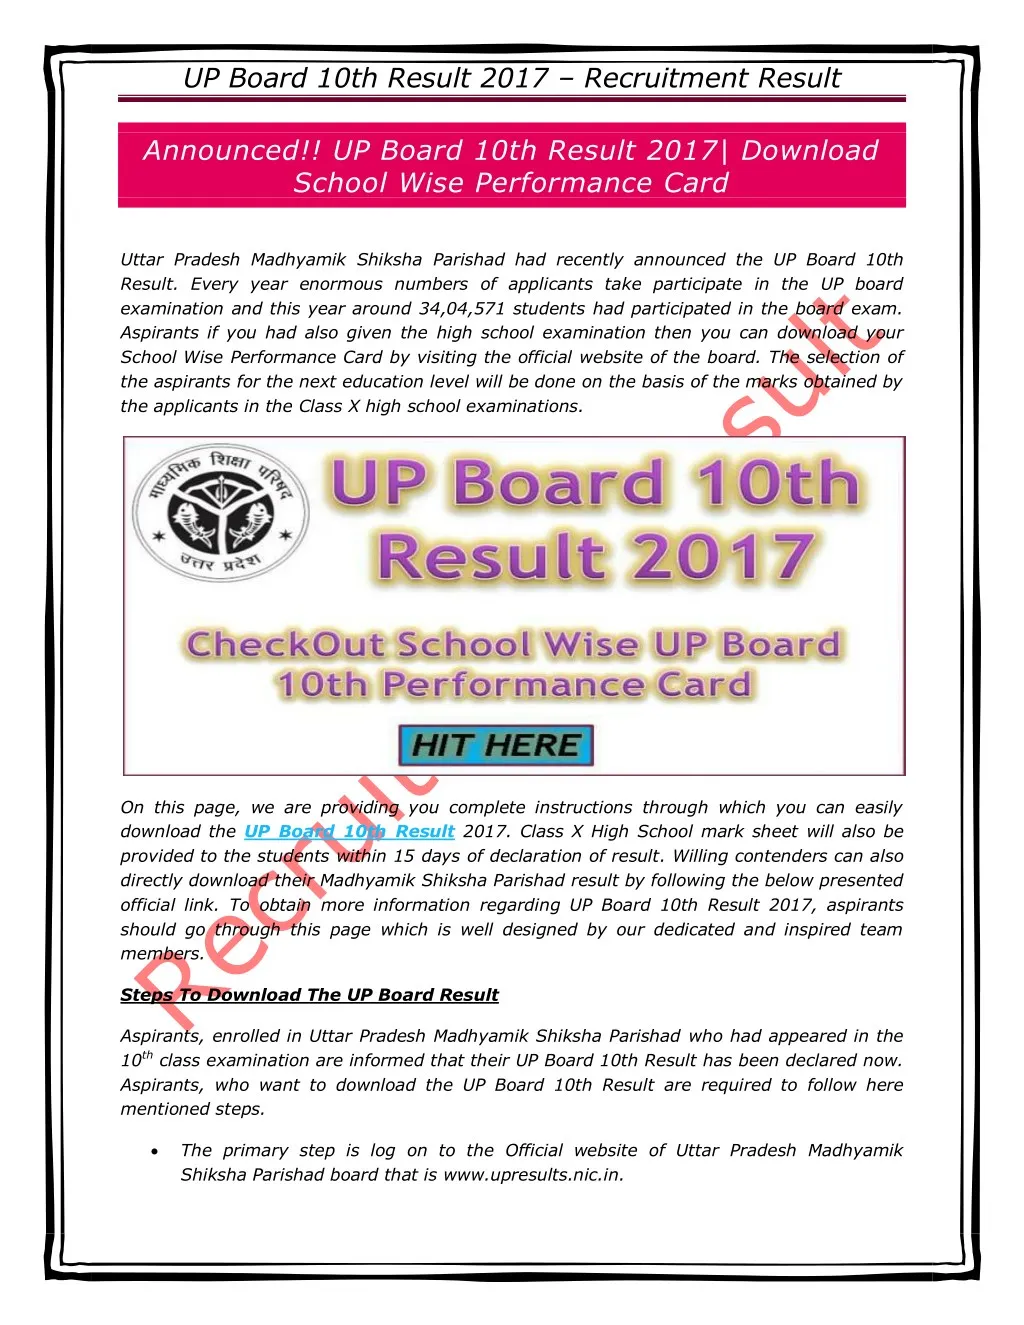 up board 10th result 2017 recruitment result